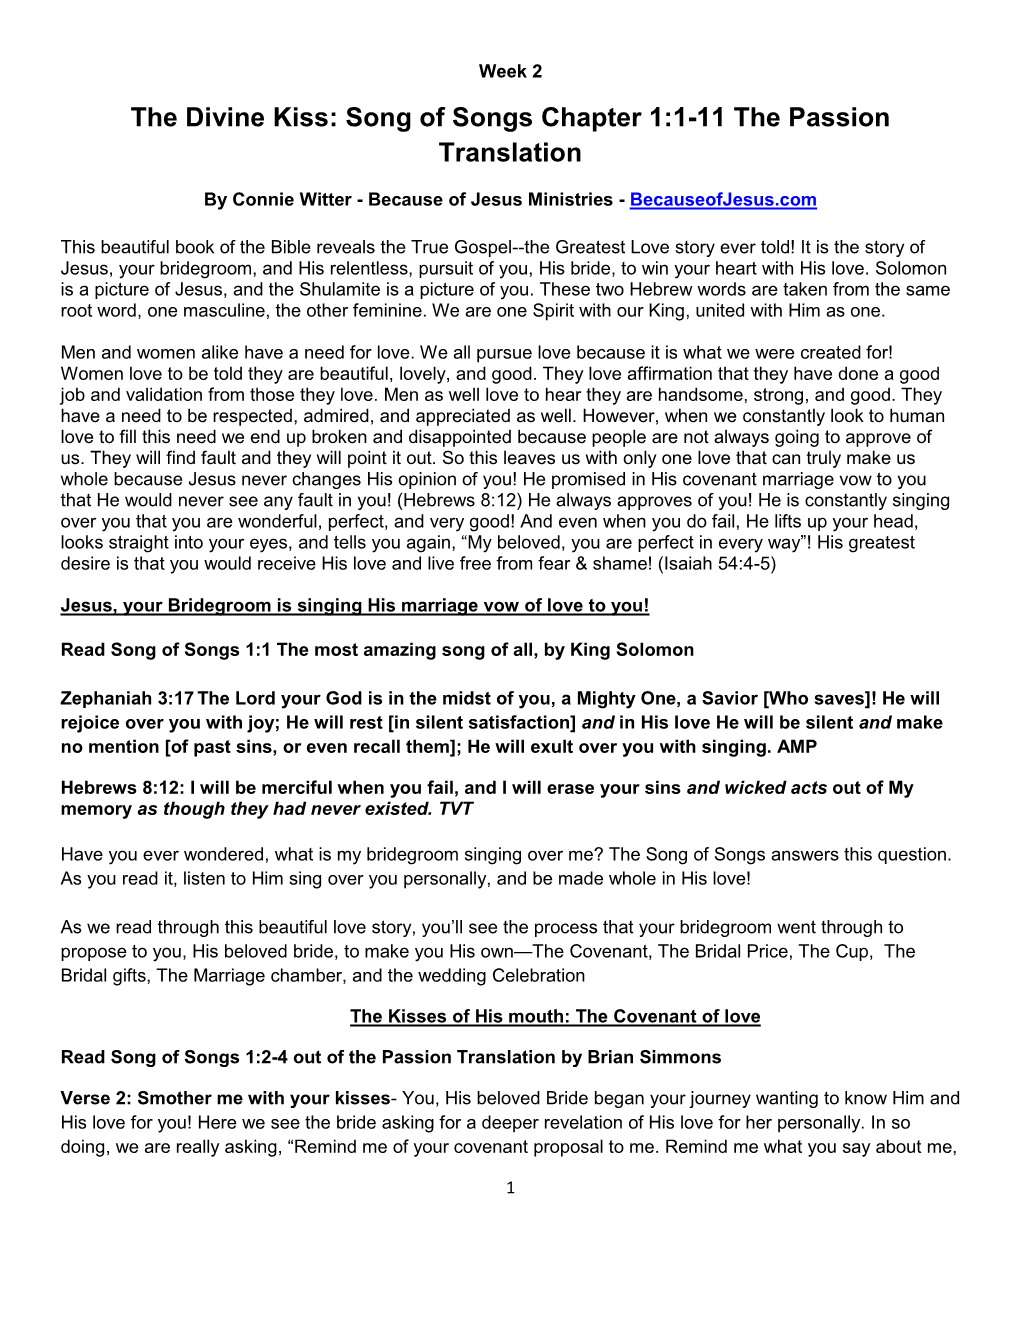 The Divine Kiss: Song of Songs Chapter 1:1-11 the Passion Translation